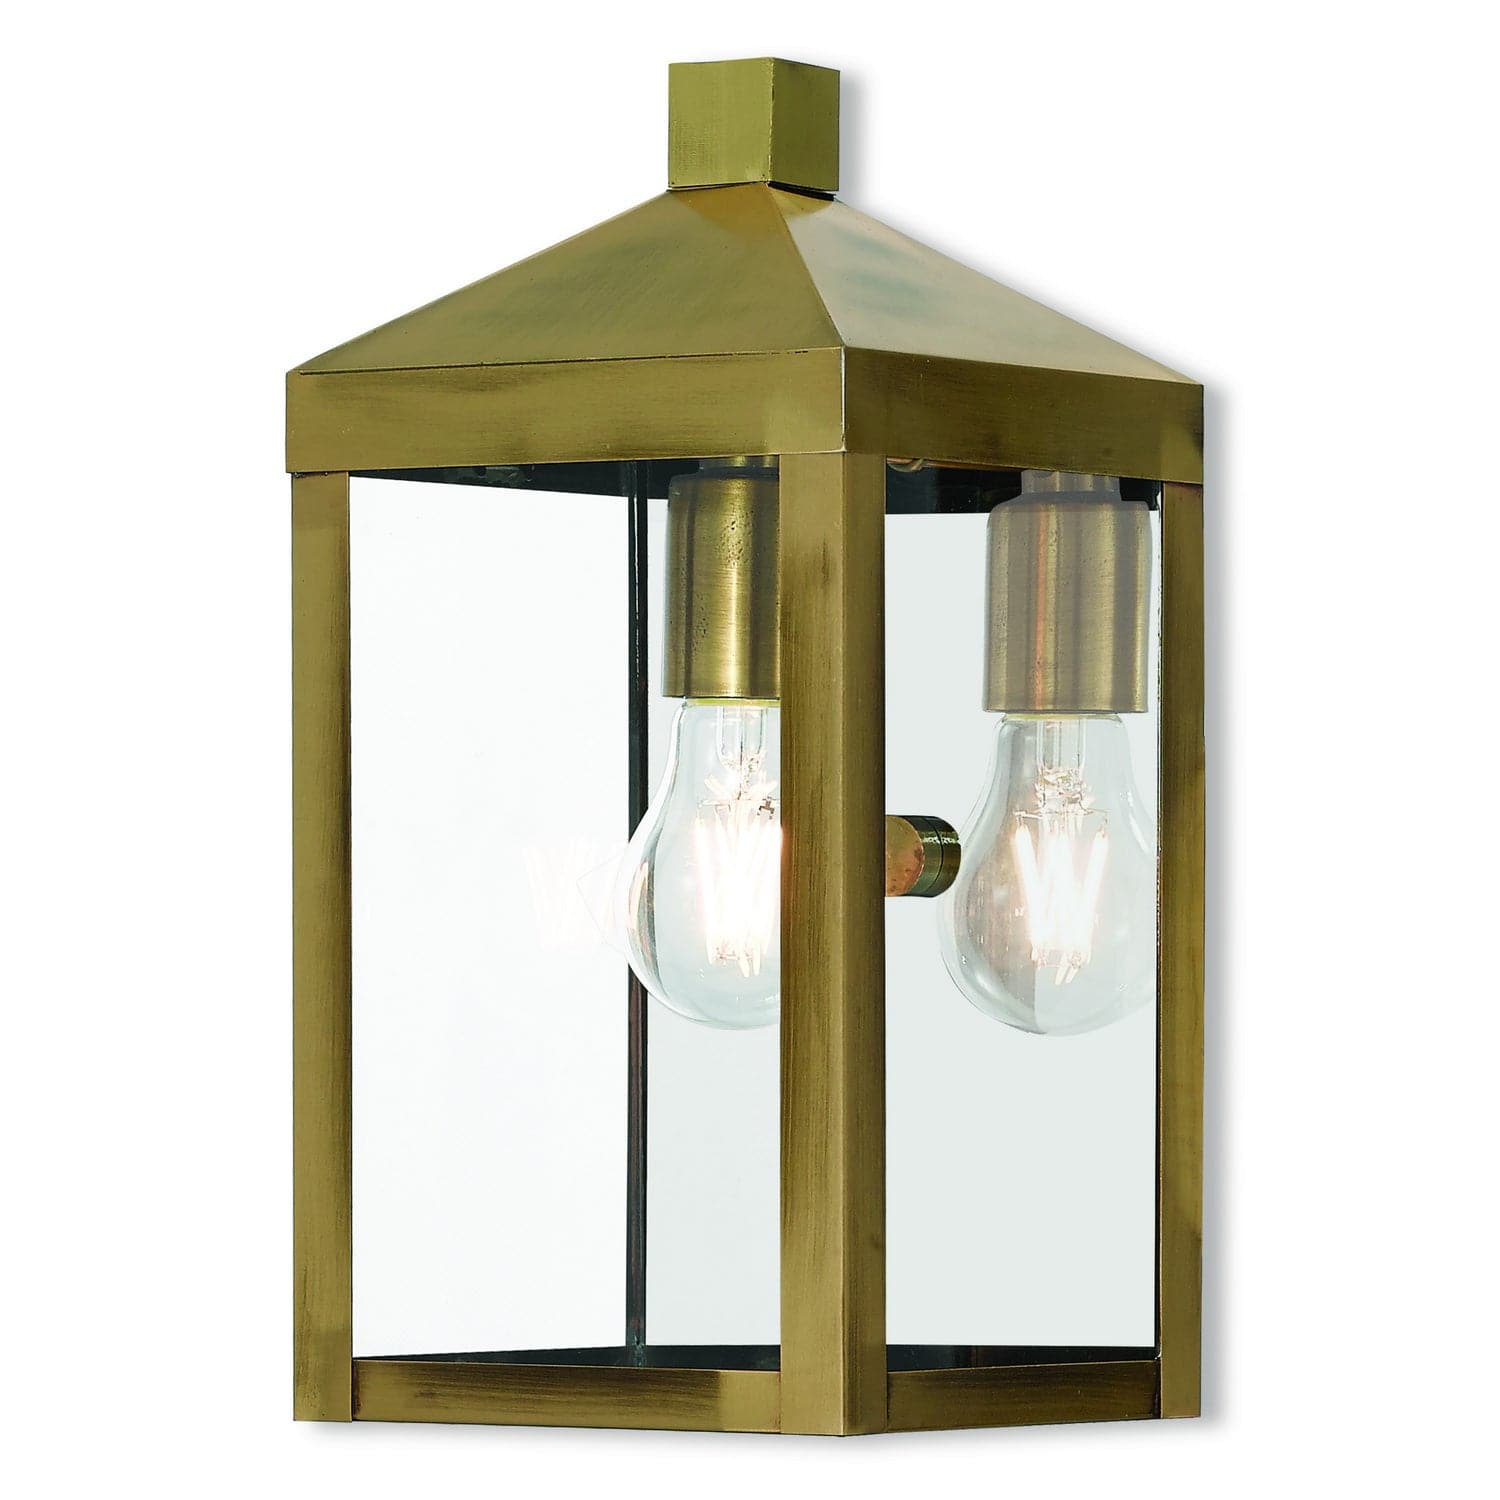 Livex Lighting - 20582-01 - One Light Outdoor Wall Lantern - Nyack - Antique Brass w/ Polished Chrome Stainless Steel